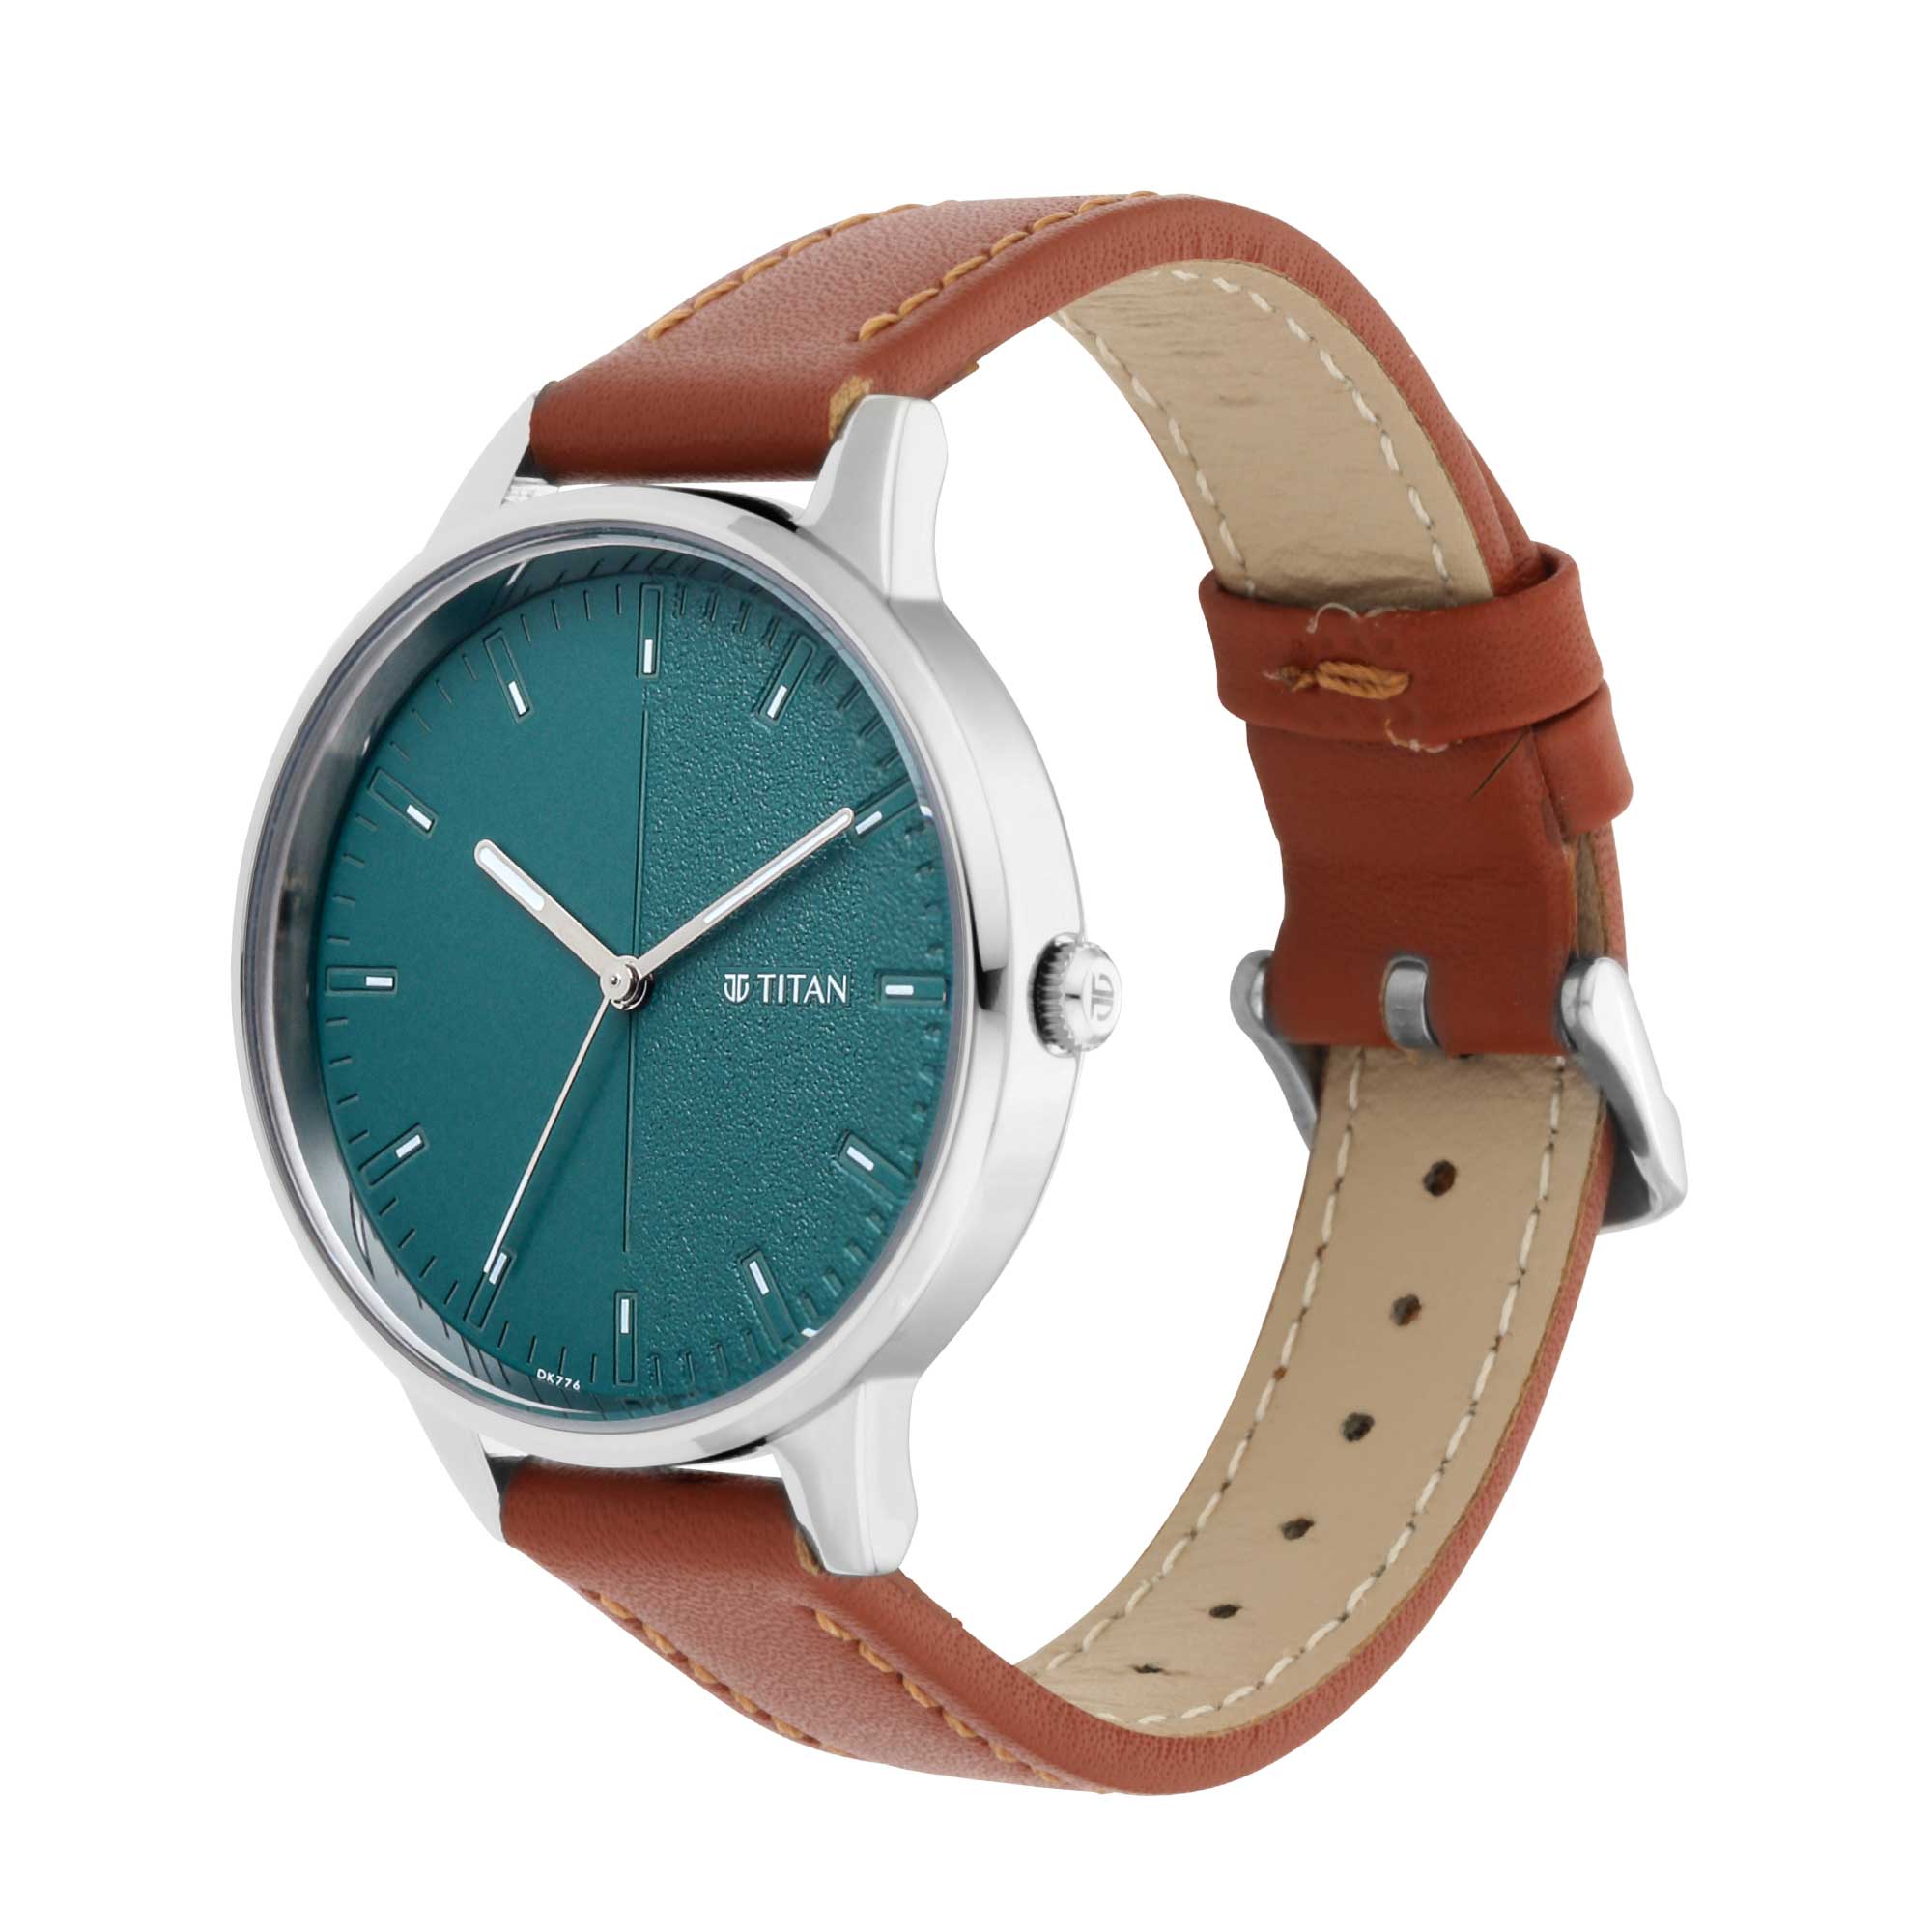 Titan Workwear Green Dial Women Watch With Leather Strap